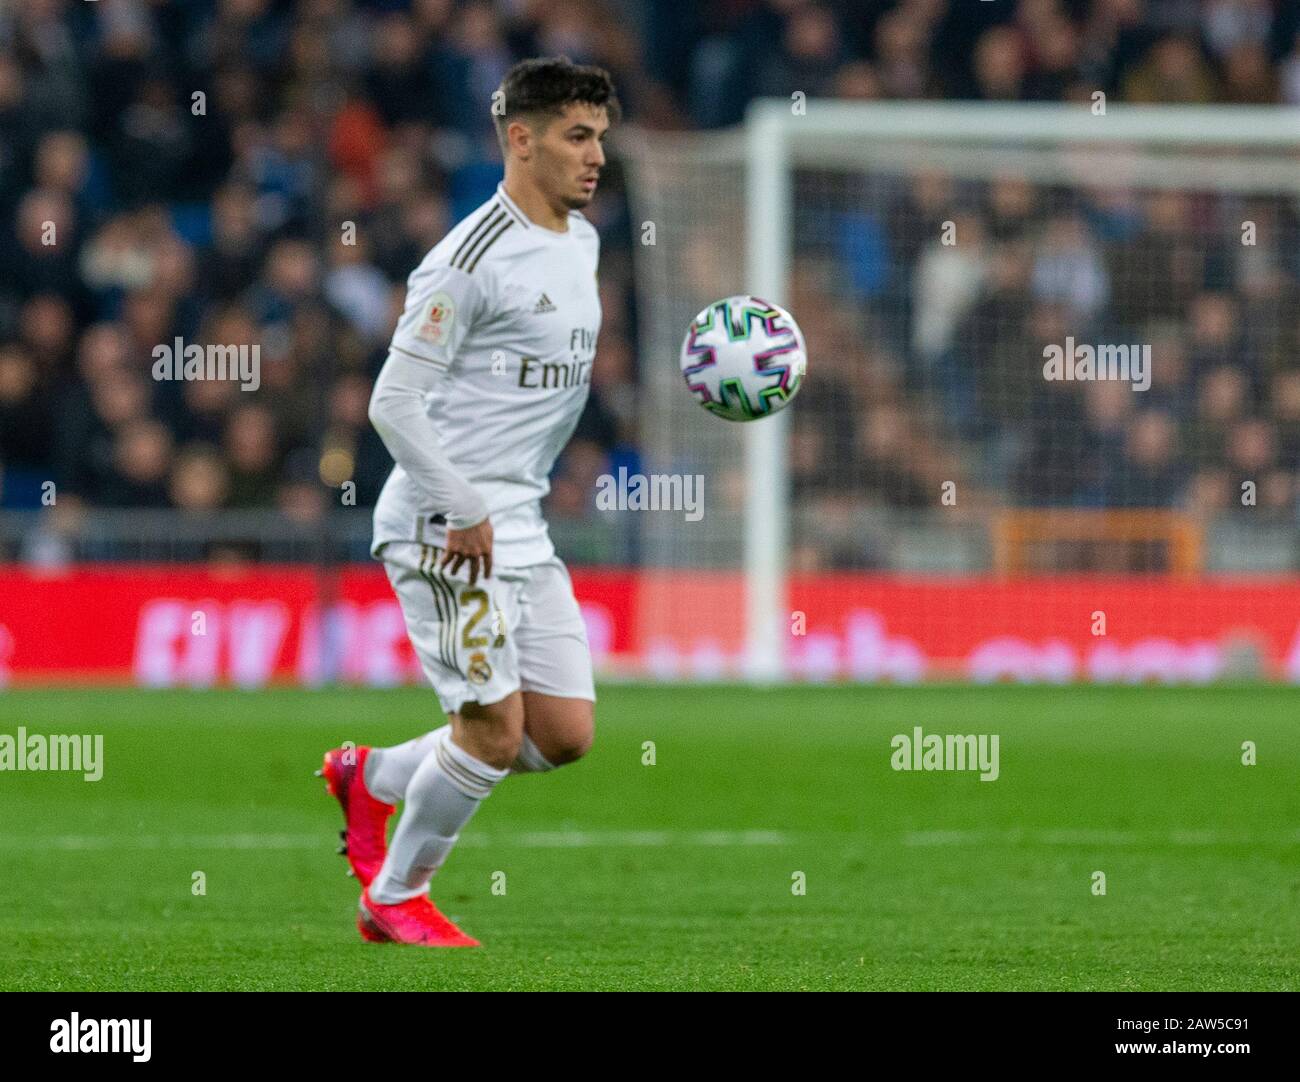 Real Madrid CF's Brahim Diaz seen in action during the Spanish quarterfinal  Copa del Rey match between Real Madrid and Real Sociedad at Santiago  Bernabeu Stadium in Madrid.(Final score; Real Madrid 3:4